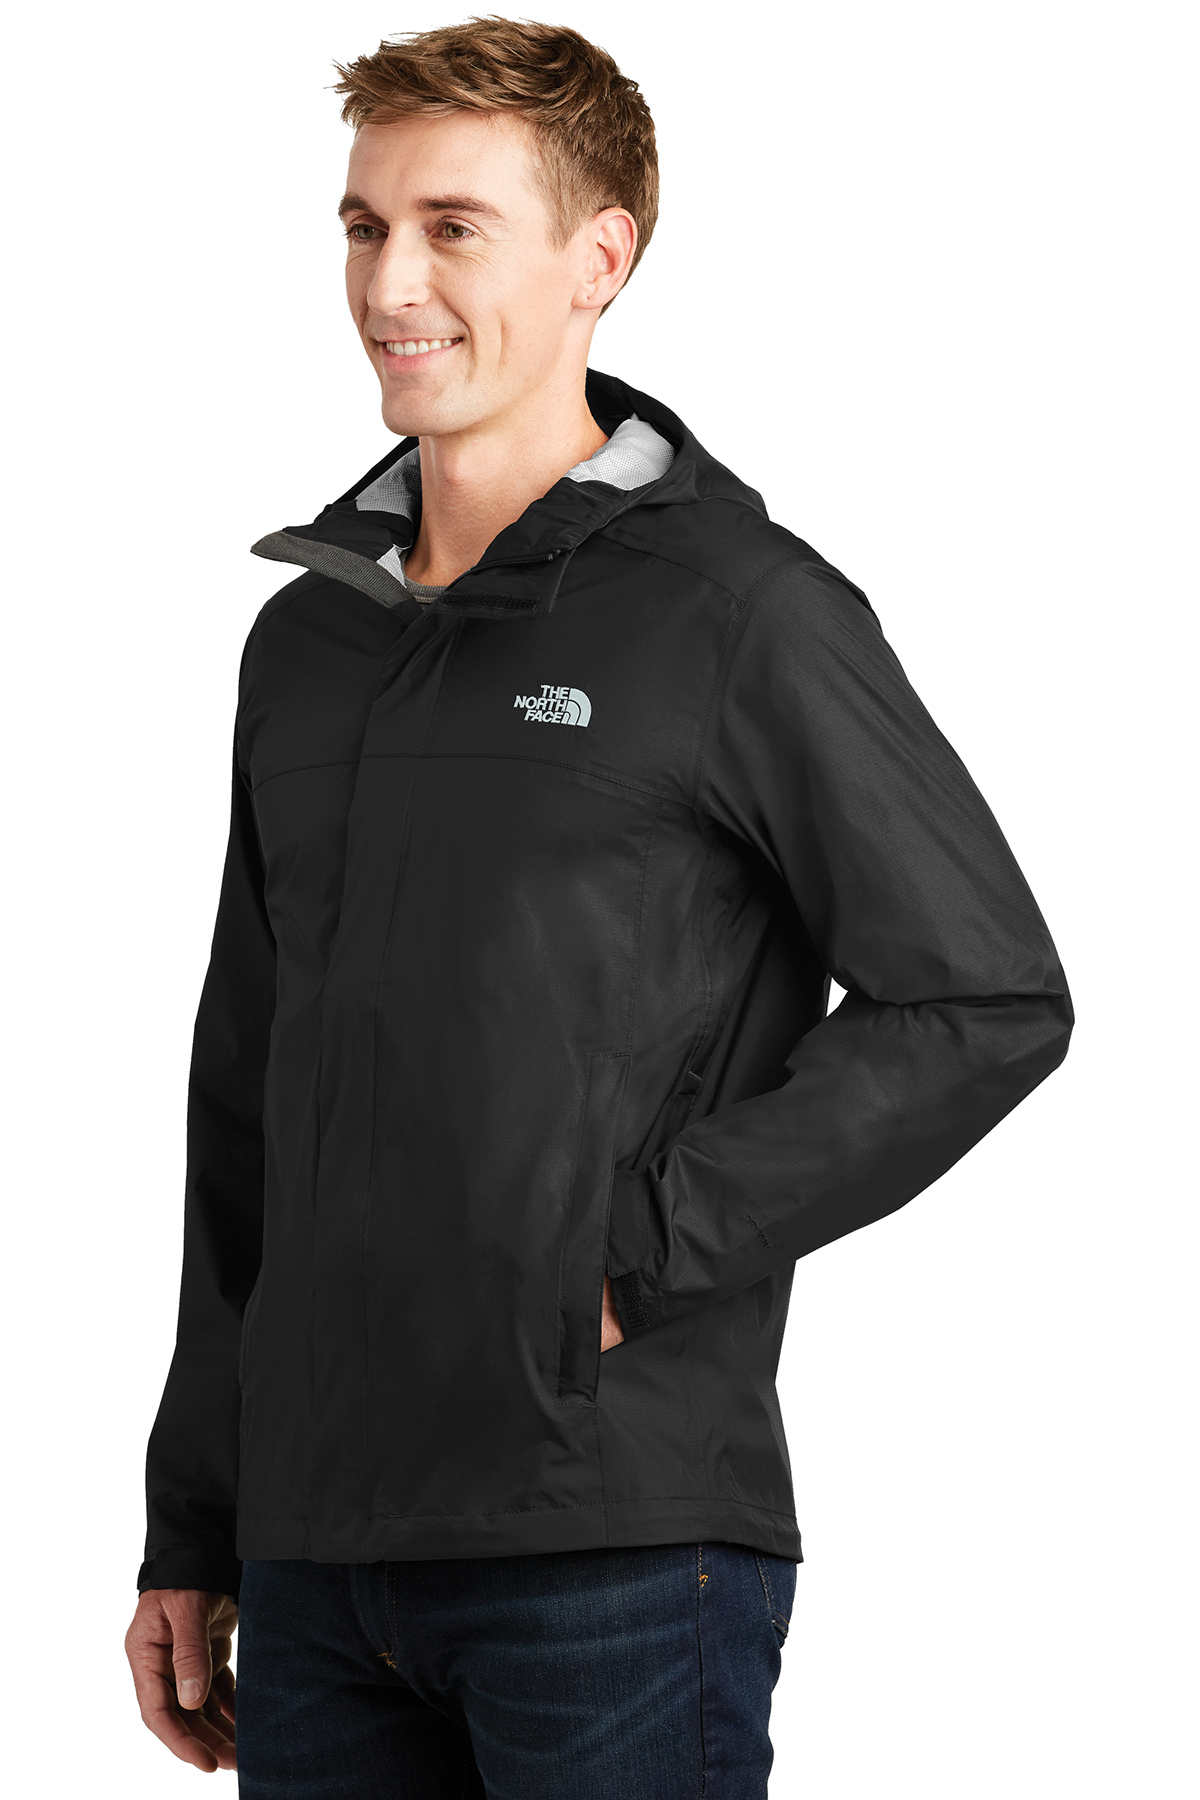 The North Face<SUP>®</SUP> DryVent™ Rain Jacket, Product